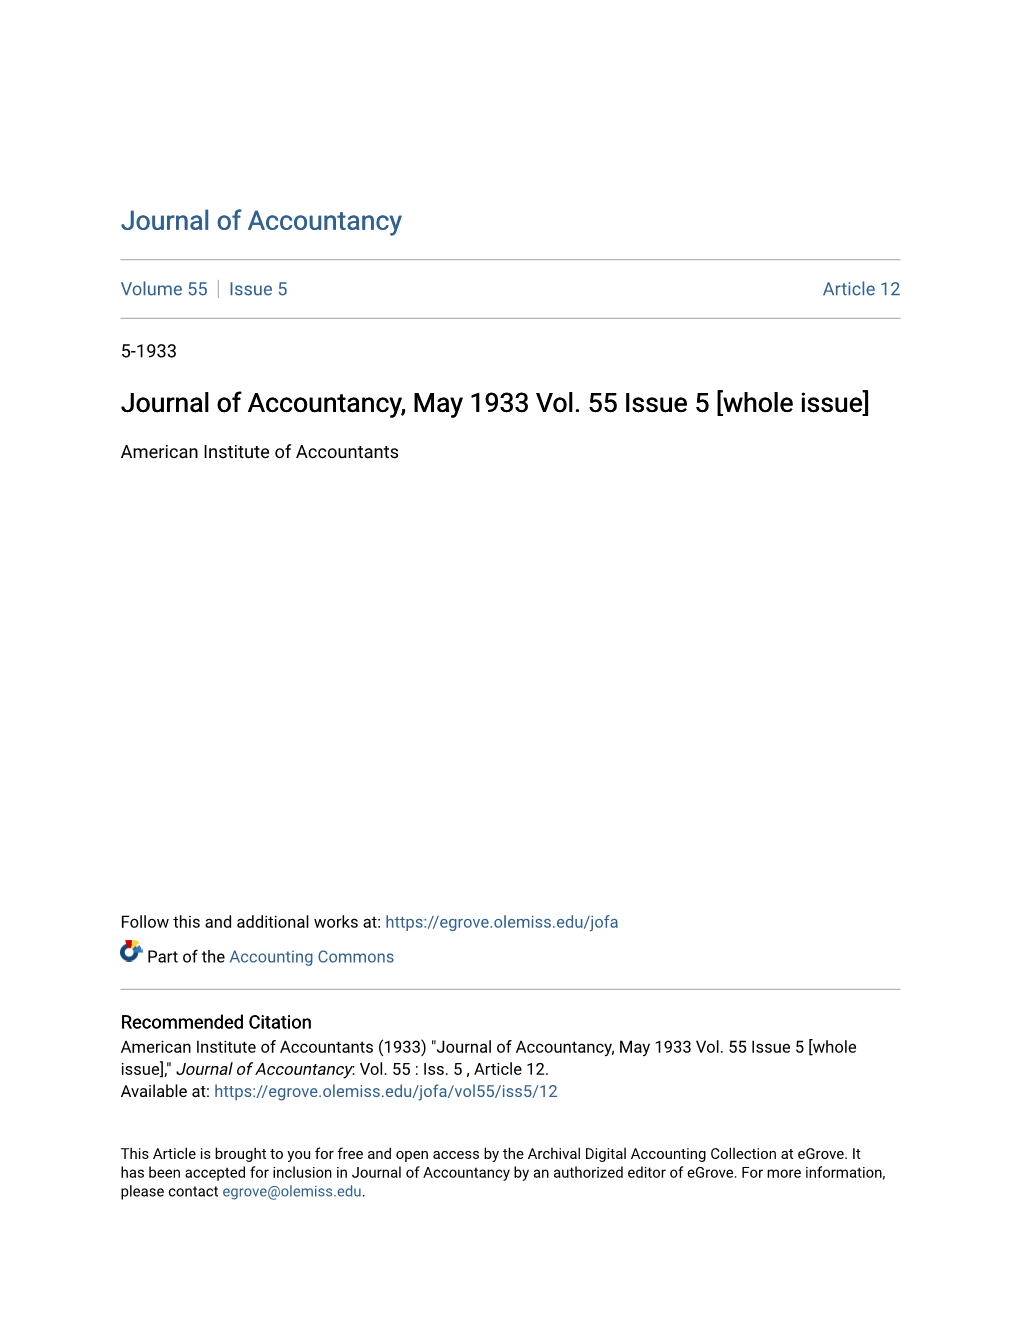 Journal of Accountancy, May 1933 Vol. 55 Issue 5 [Whole Issue]